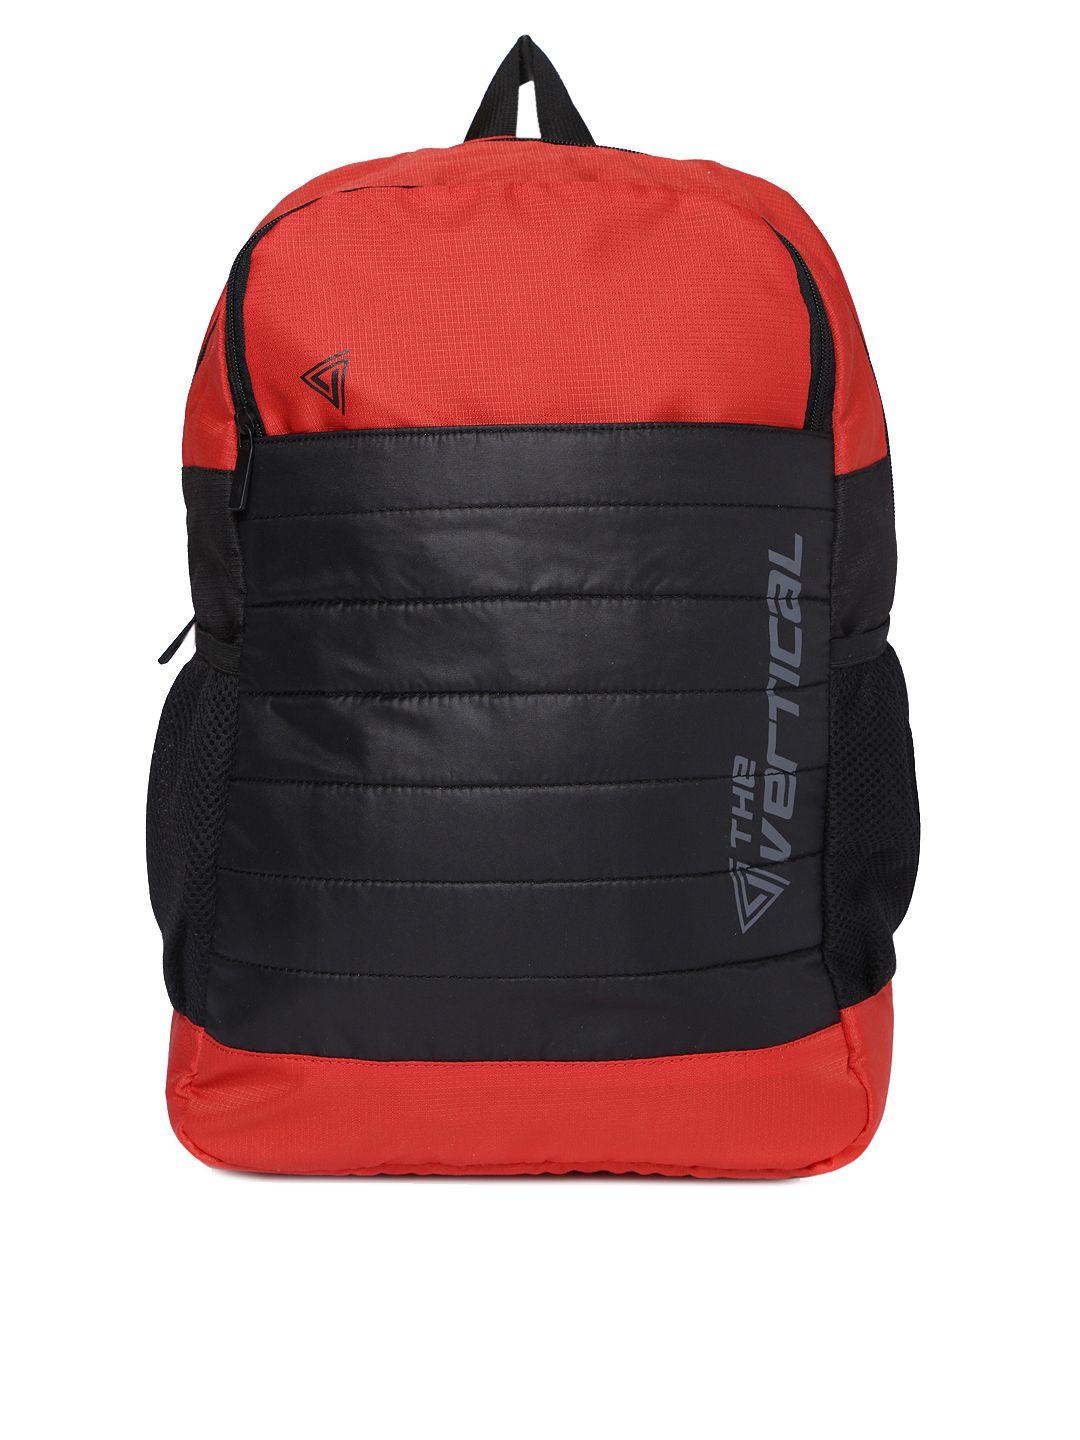 the vertical unisex red & black laptop backpack